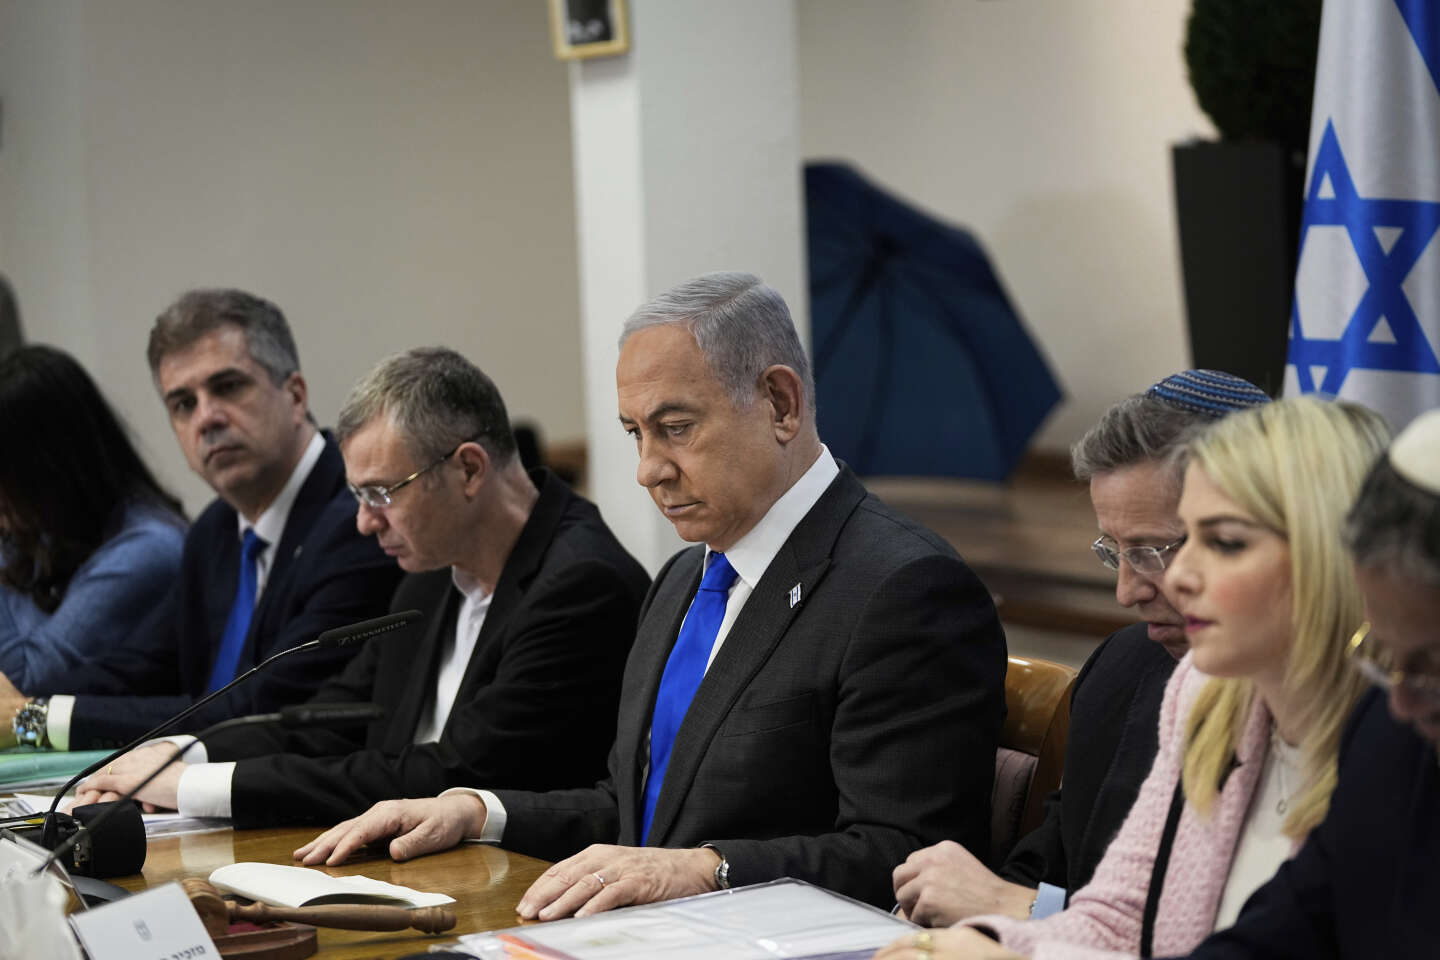 In Israel, the Supreme Court struck down a key provision of a highly contested justice reform carried out by Benjamin Netanyahu.